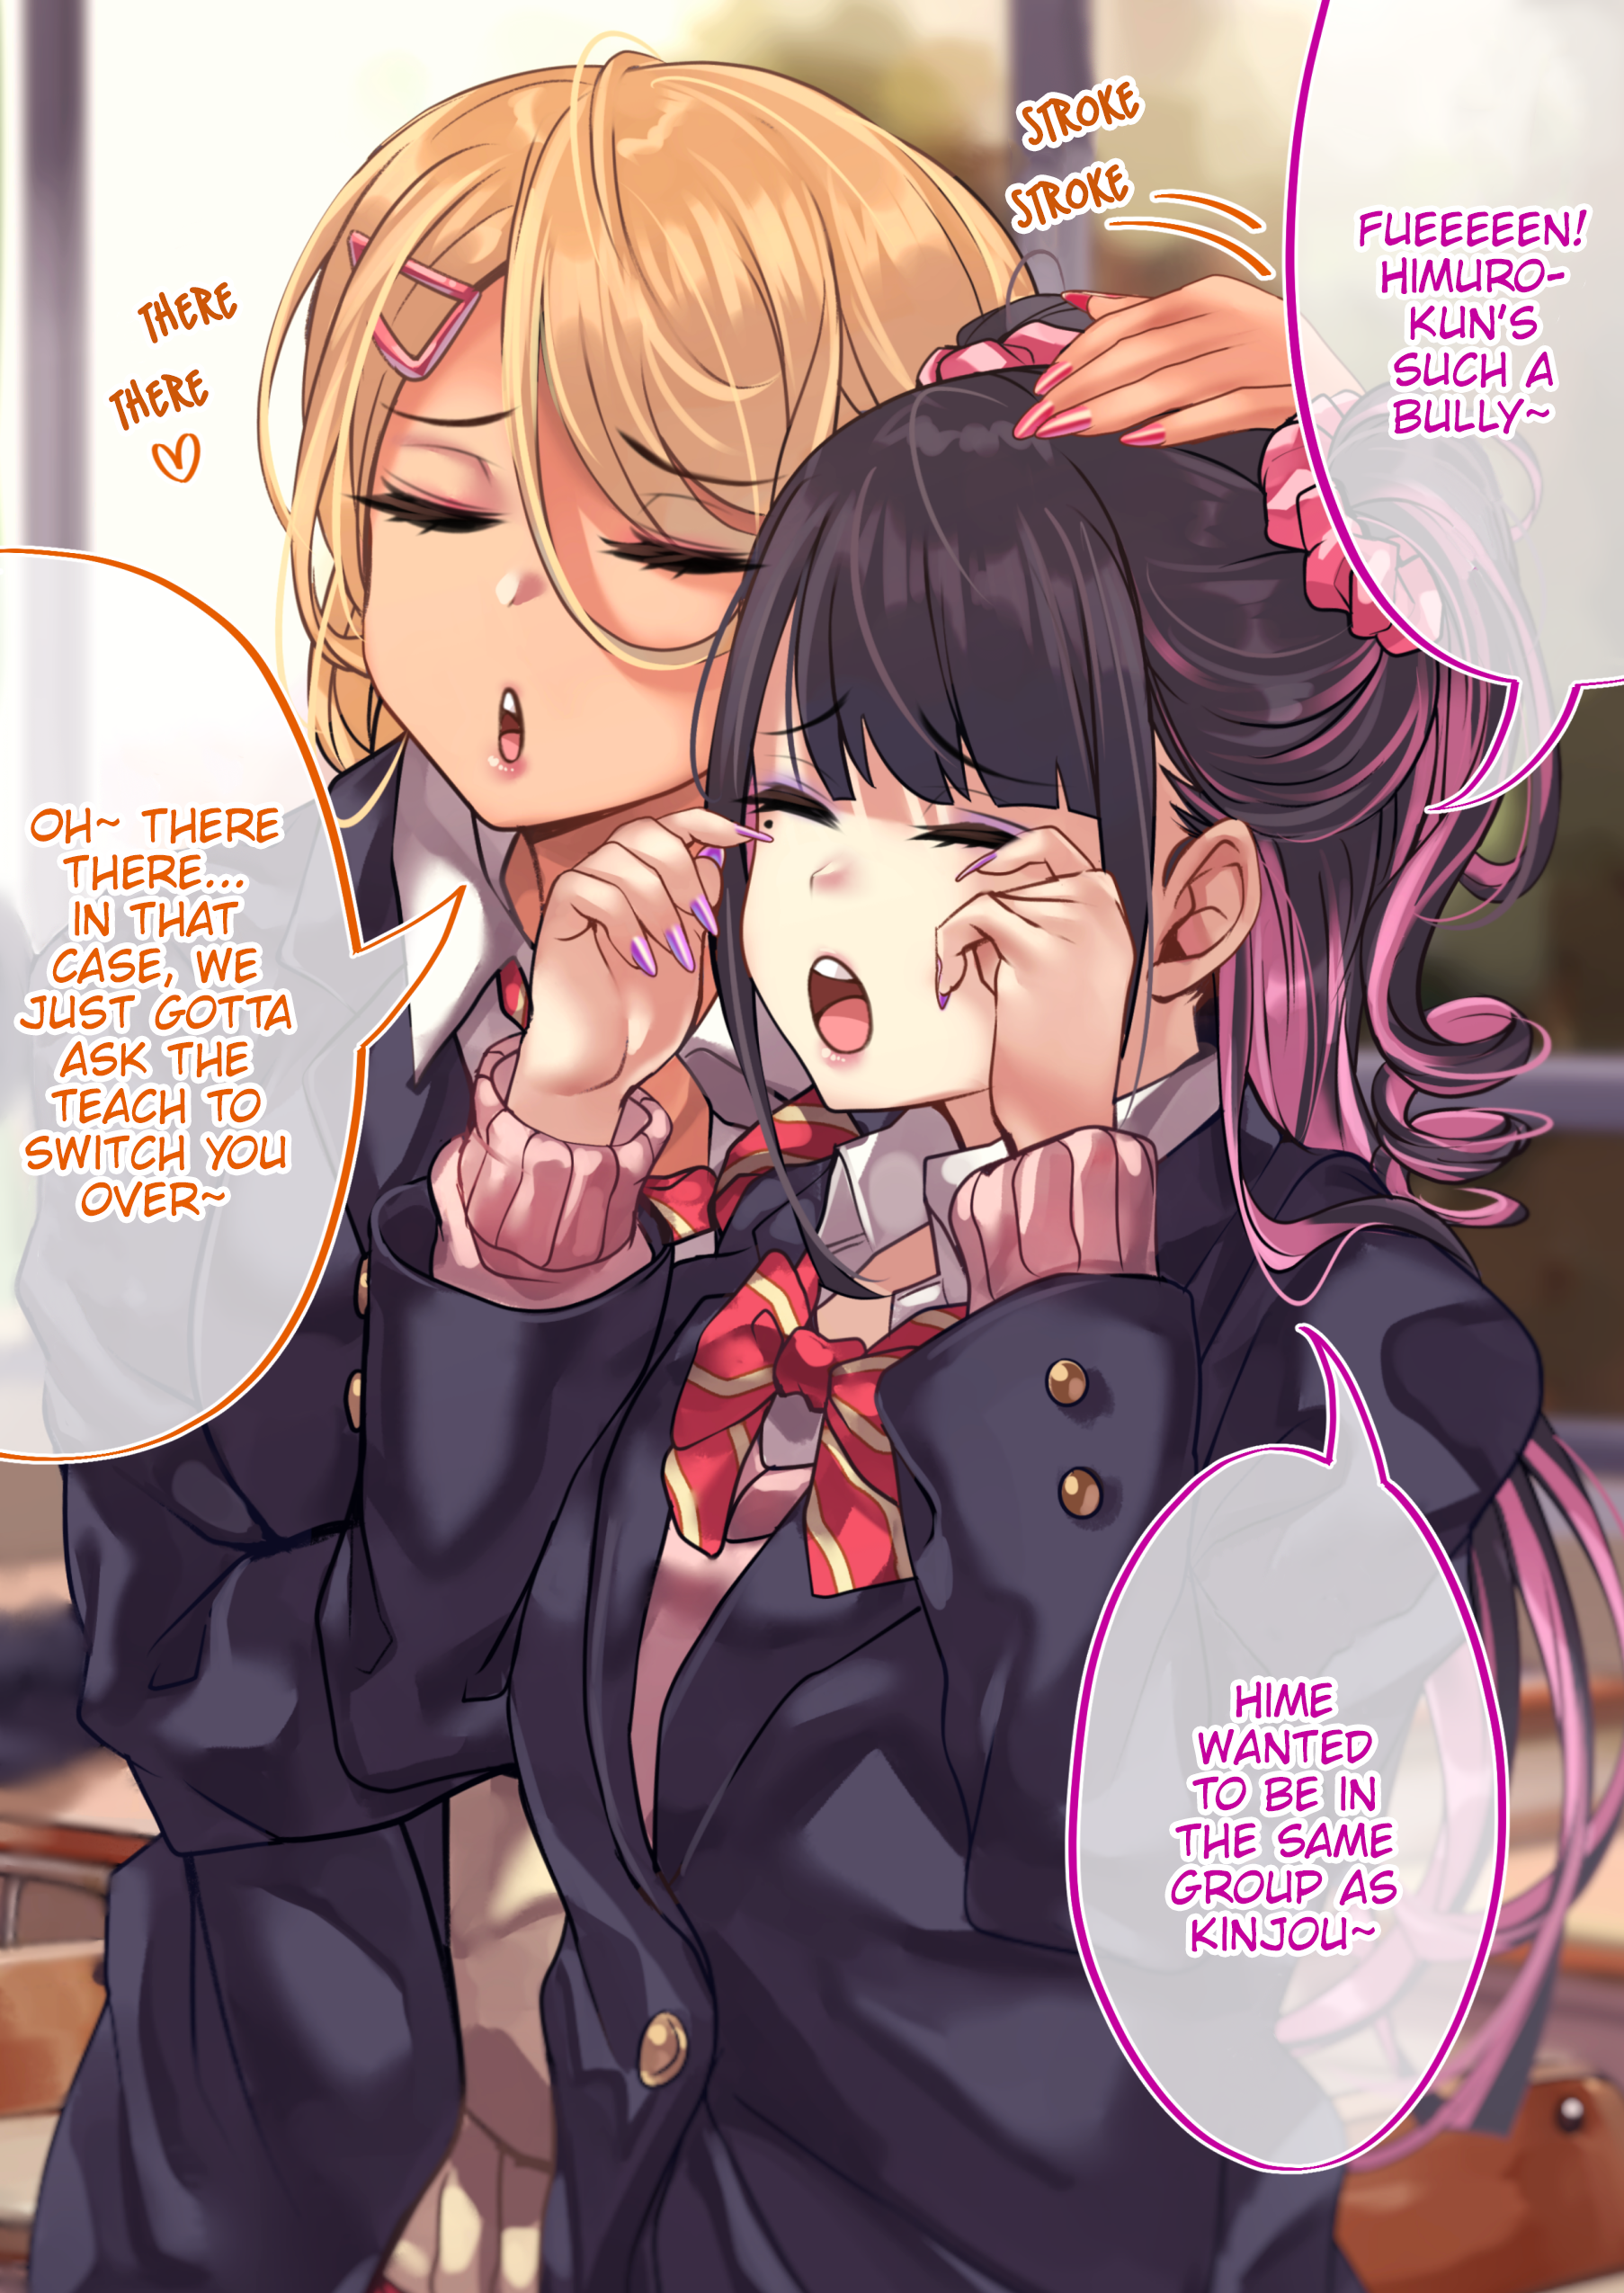 The Story Of An Otaku And A Gyaru Falling In Love - Page 1